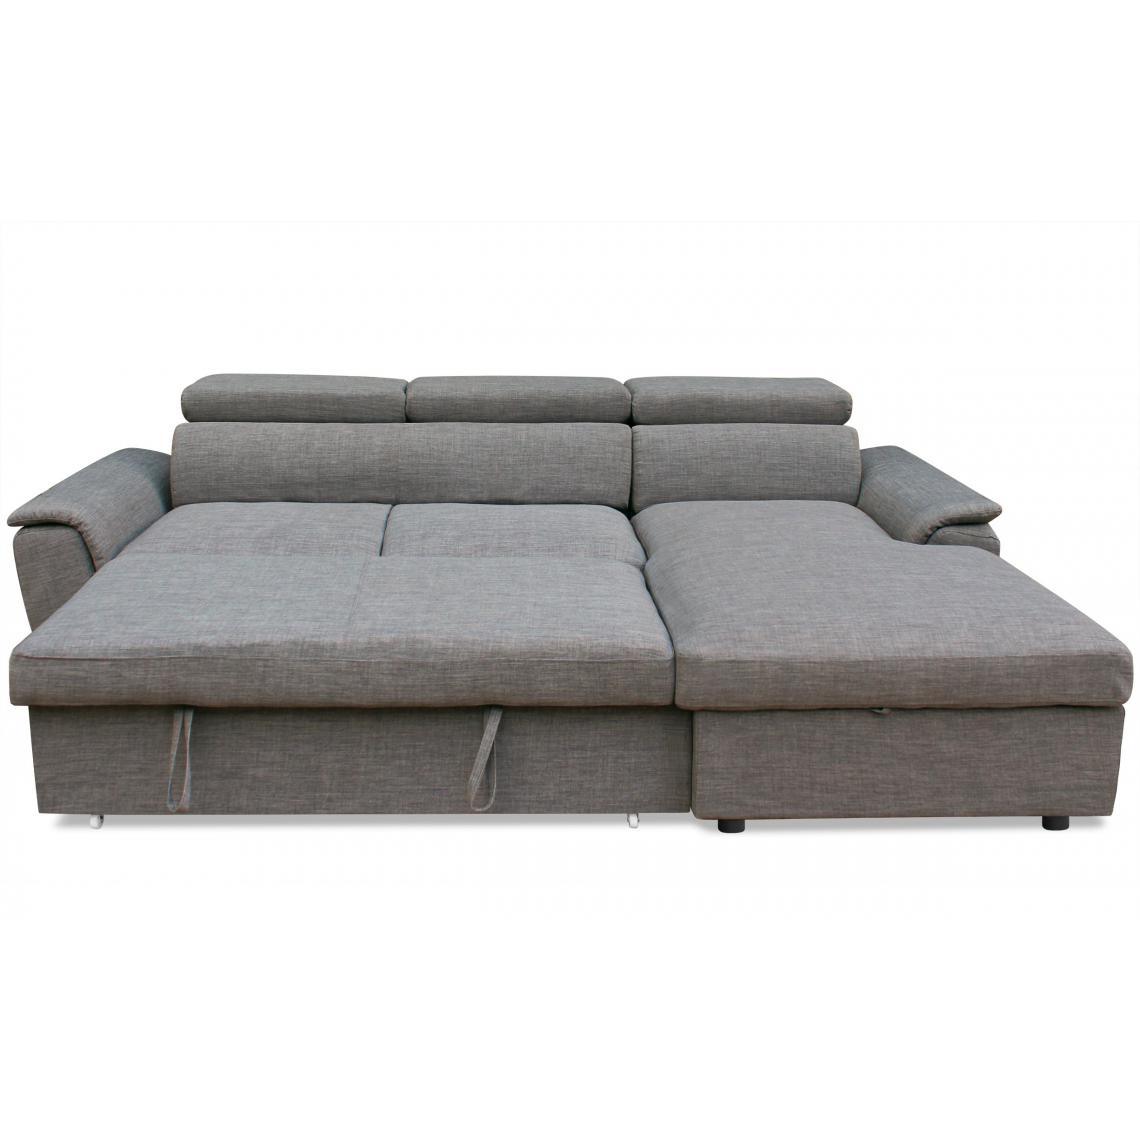 Canapé D'Angle Convertible Tissu Taupe Orora | 3 Suisses à Canape Convertible Taupe